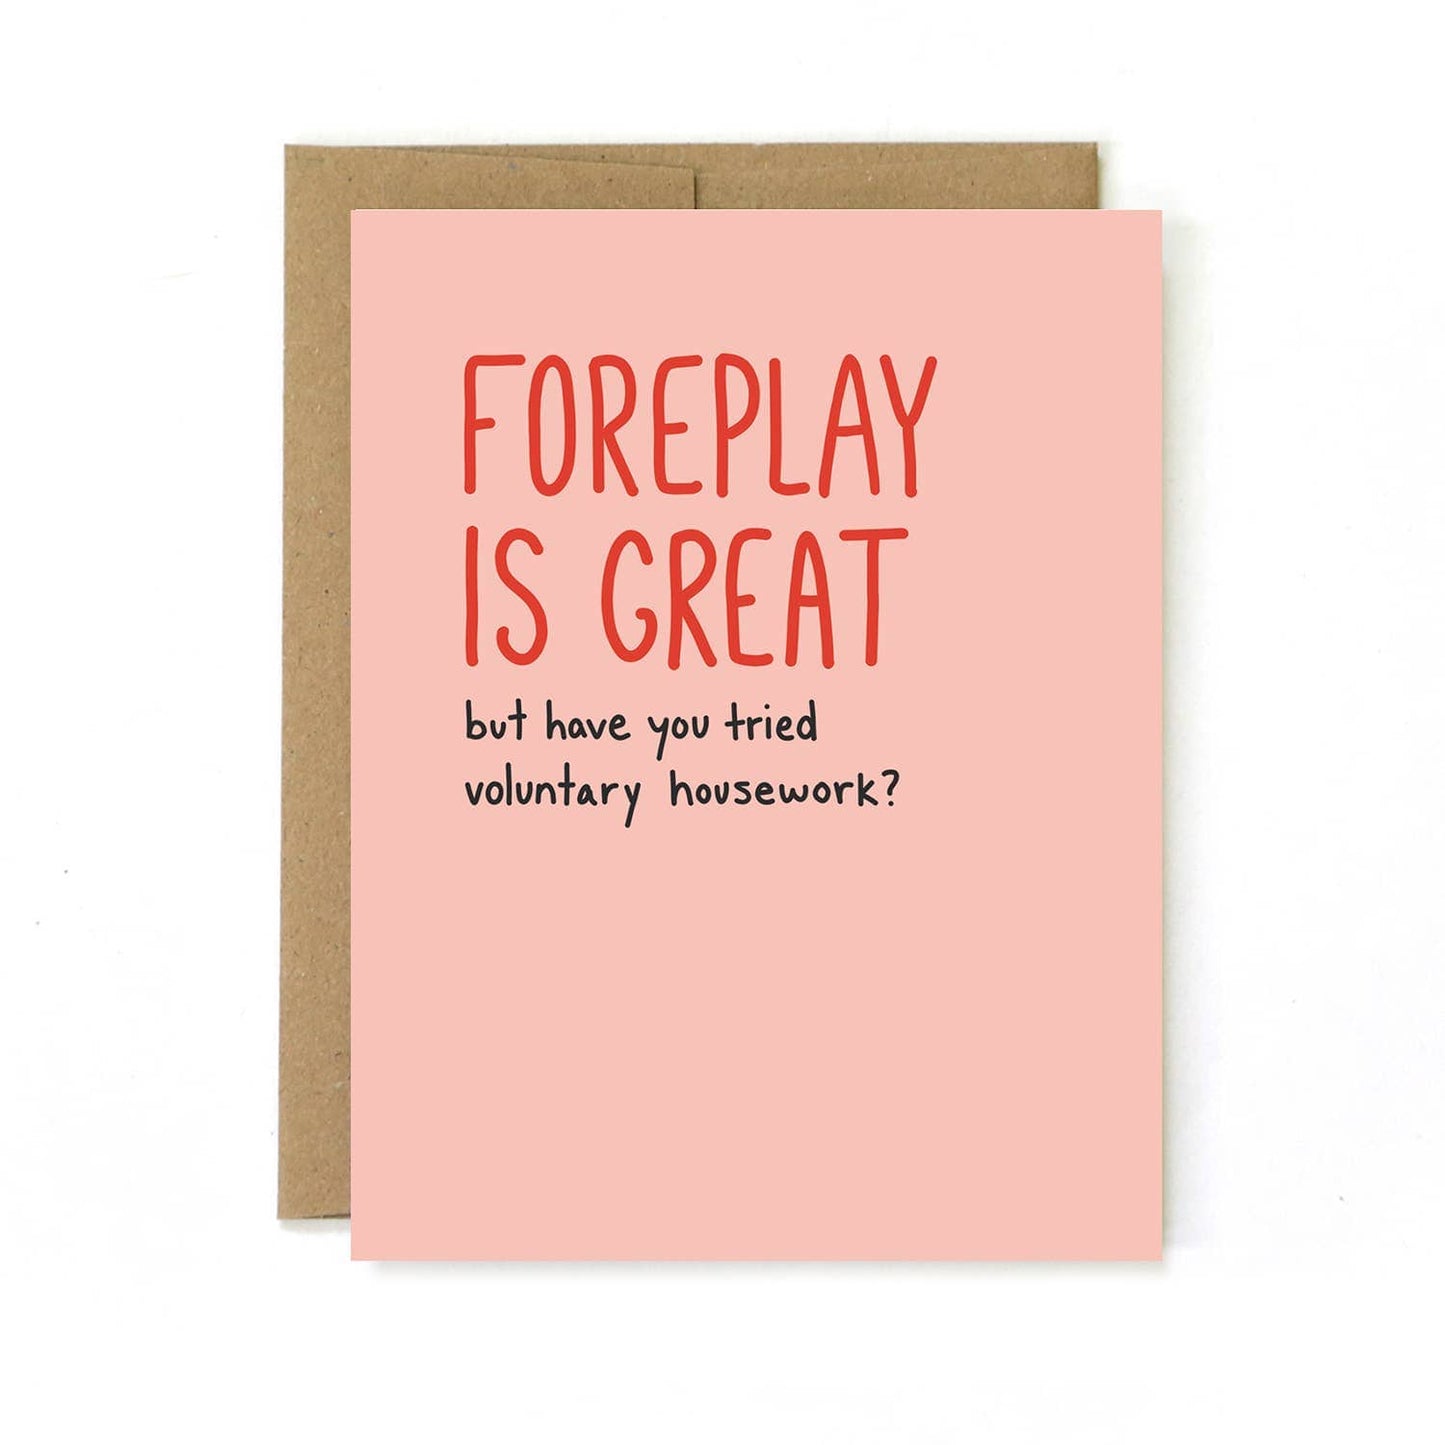 Foreplay is Great But Have You Tried Voluntary Housework? Card